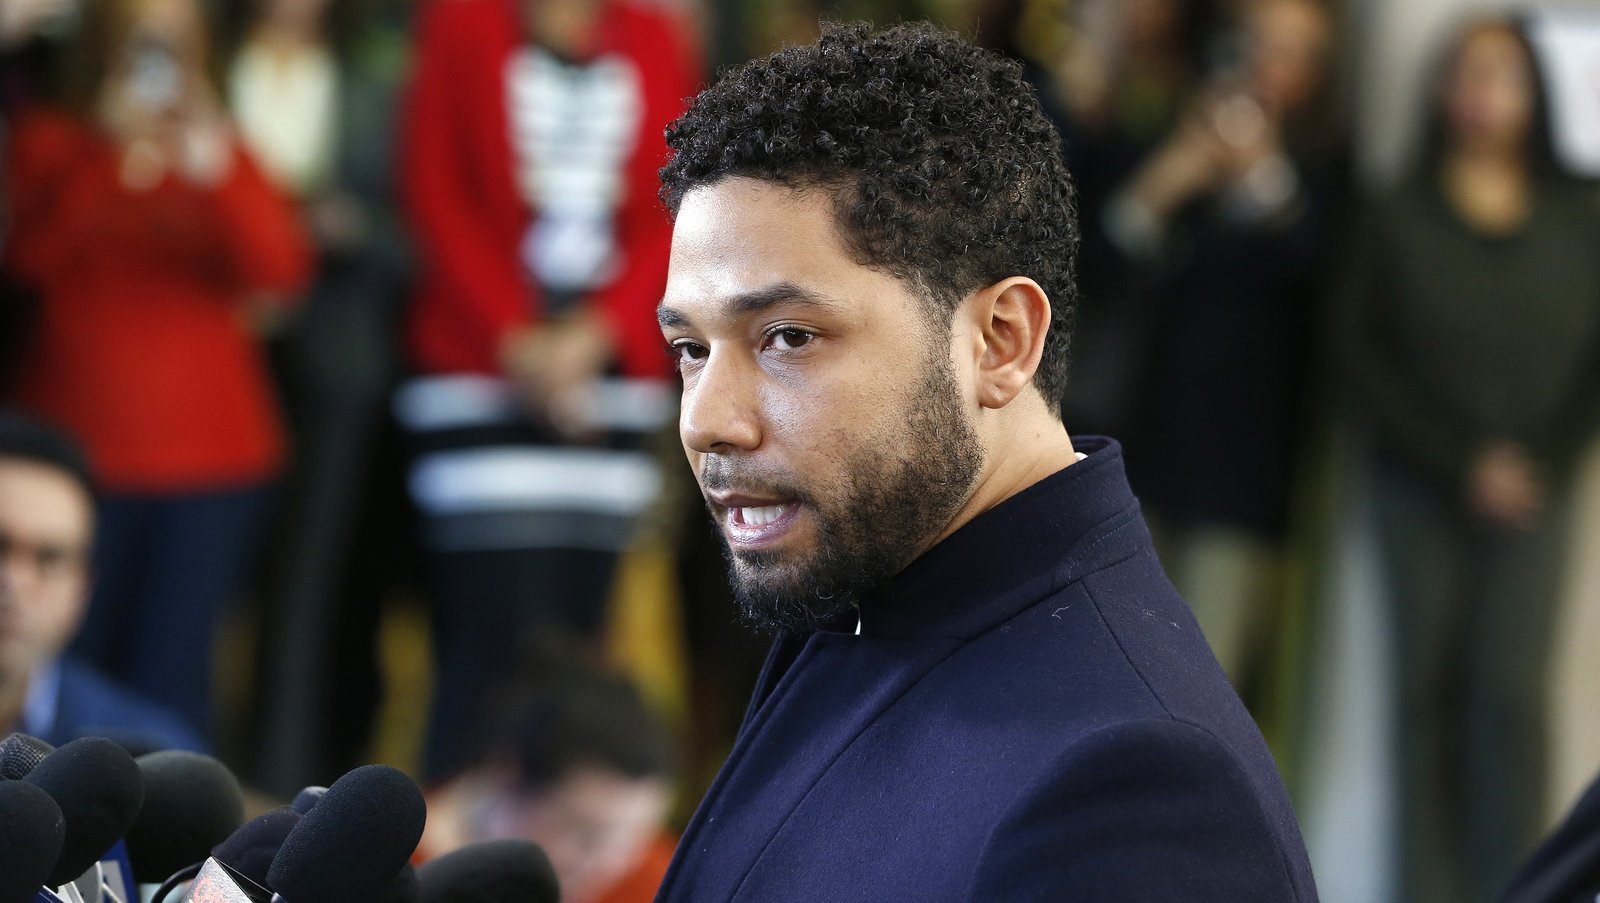 Criminal Charges Against Jussie Smollett Dropped - 